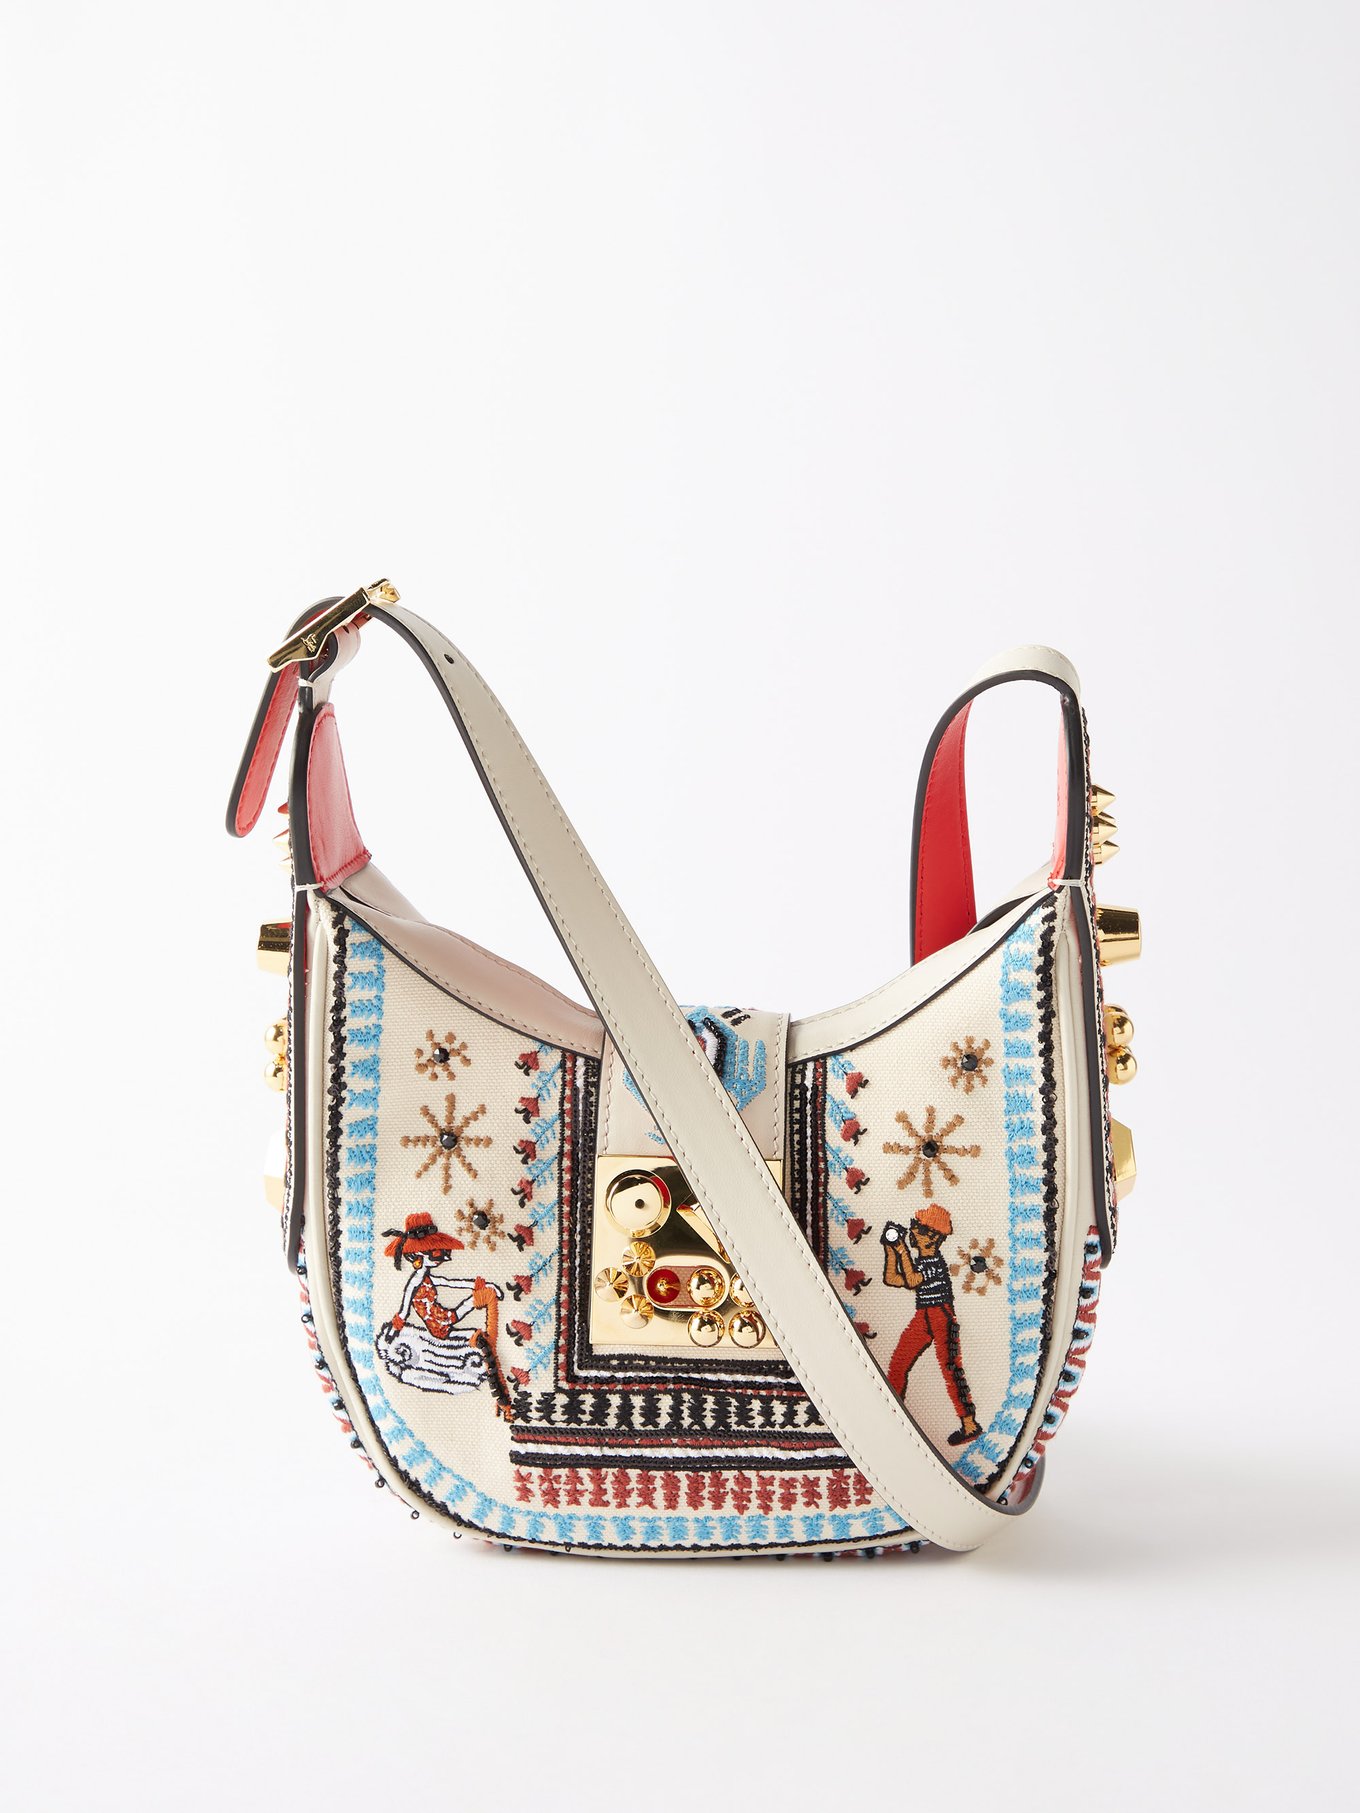 Louboutin handbags • Compare & find best prices today »